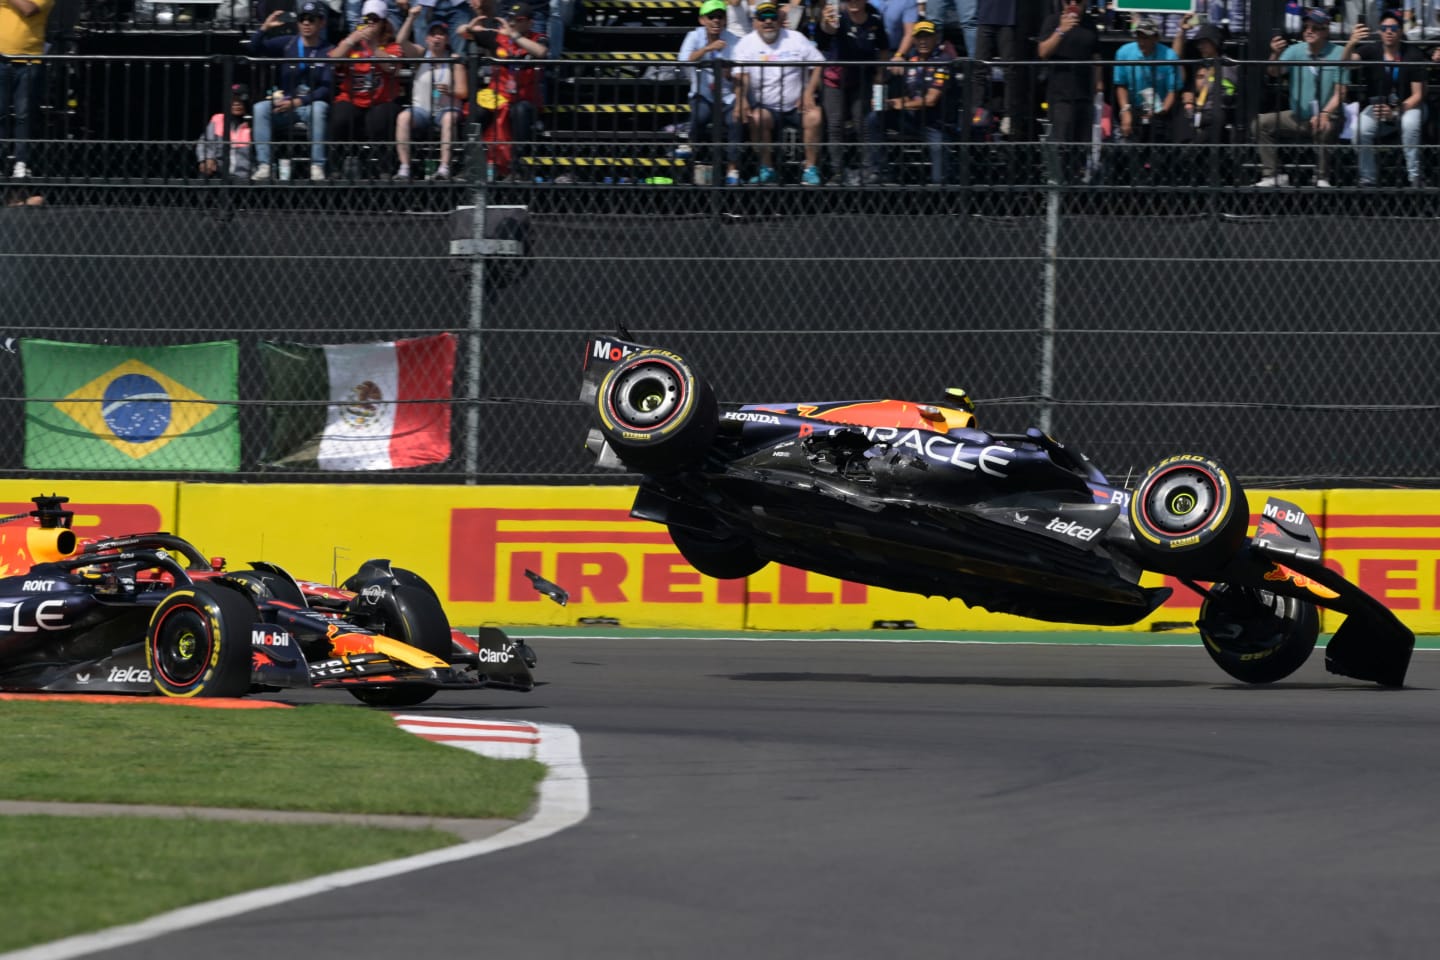 TOPSHOT - Red Bull Racing's Mexican driver Sergio Perez (R) crashes during the start of the Formula